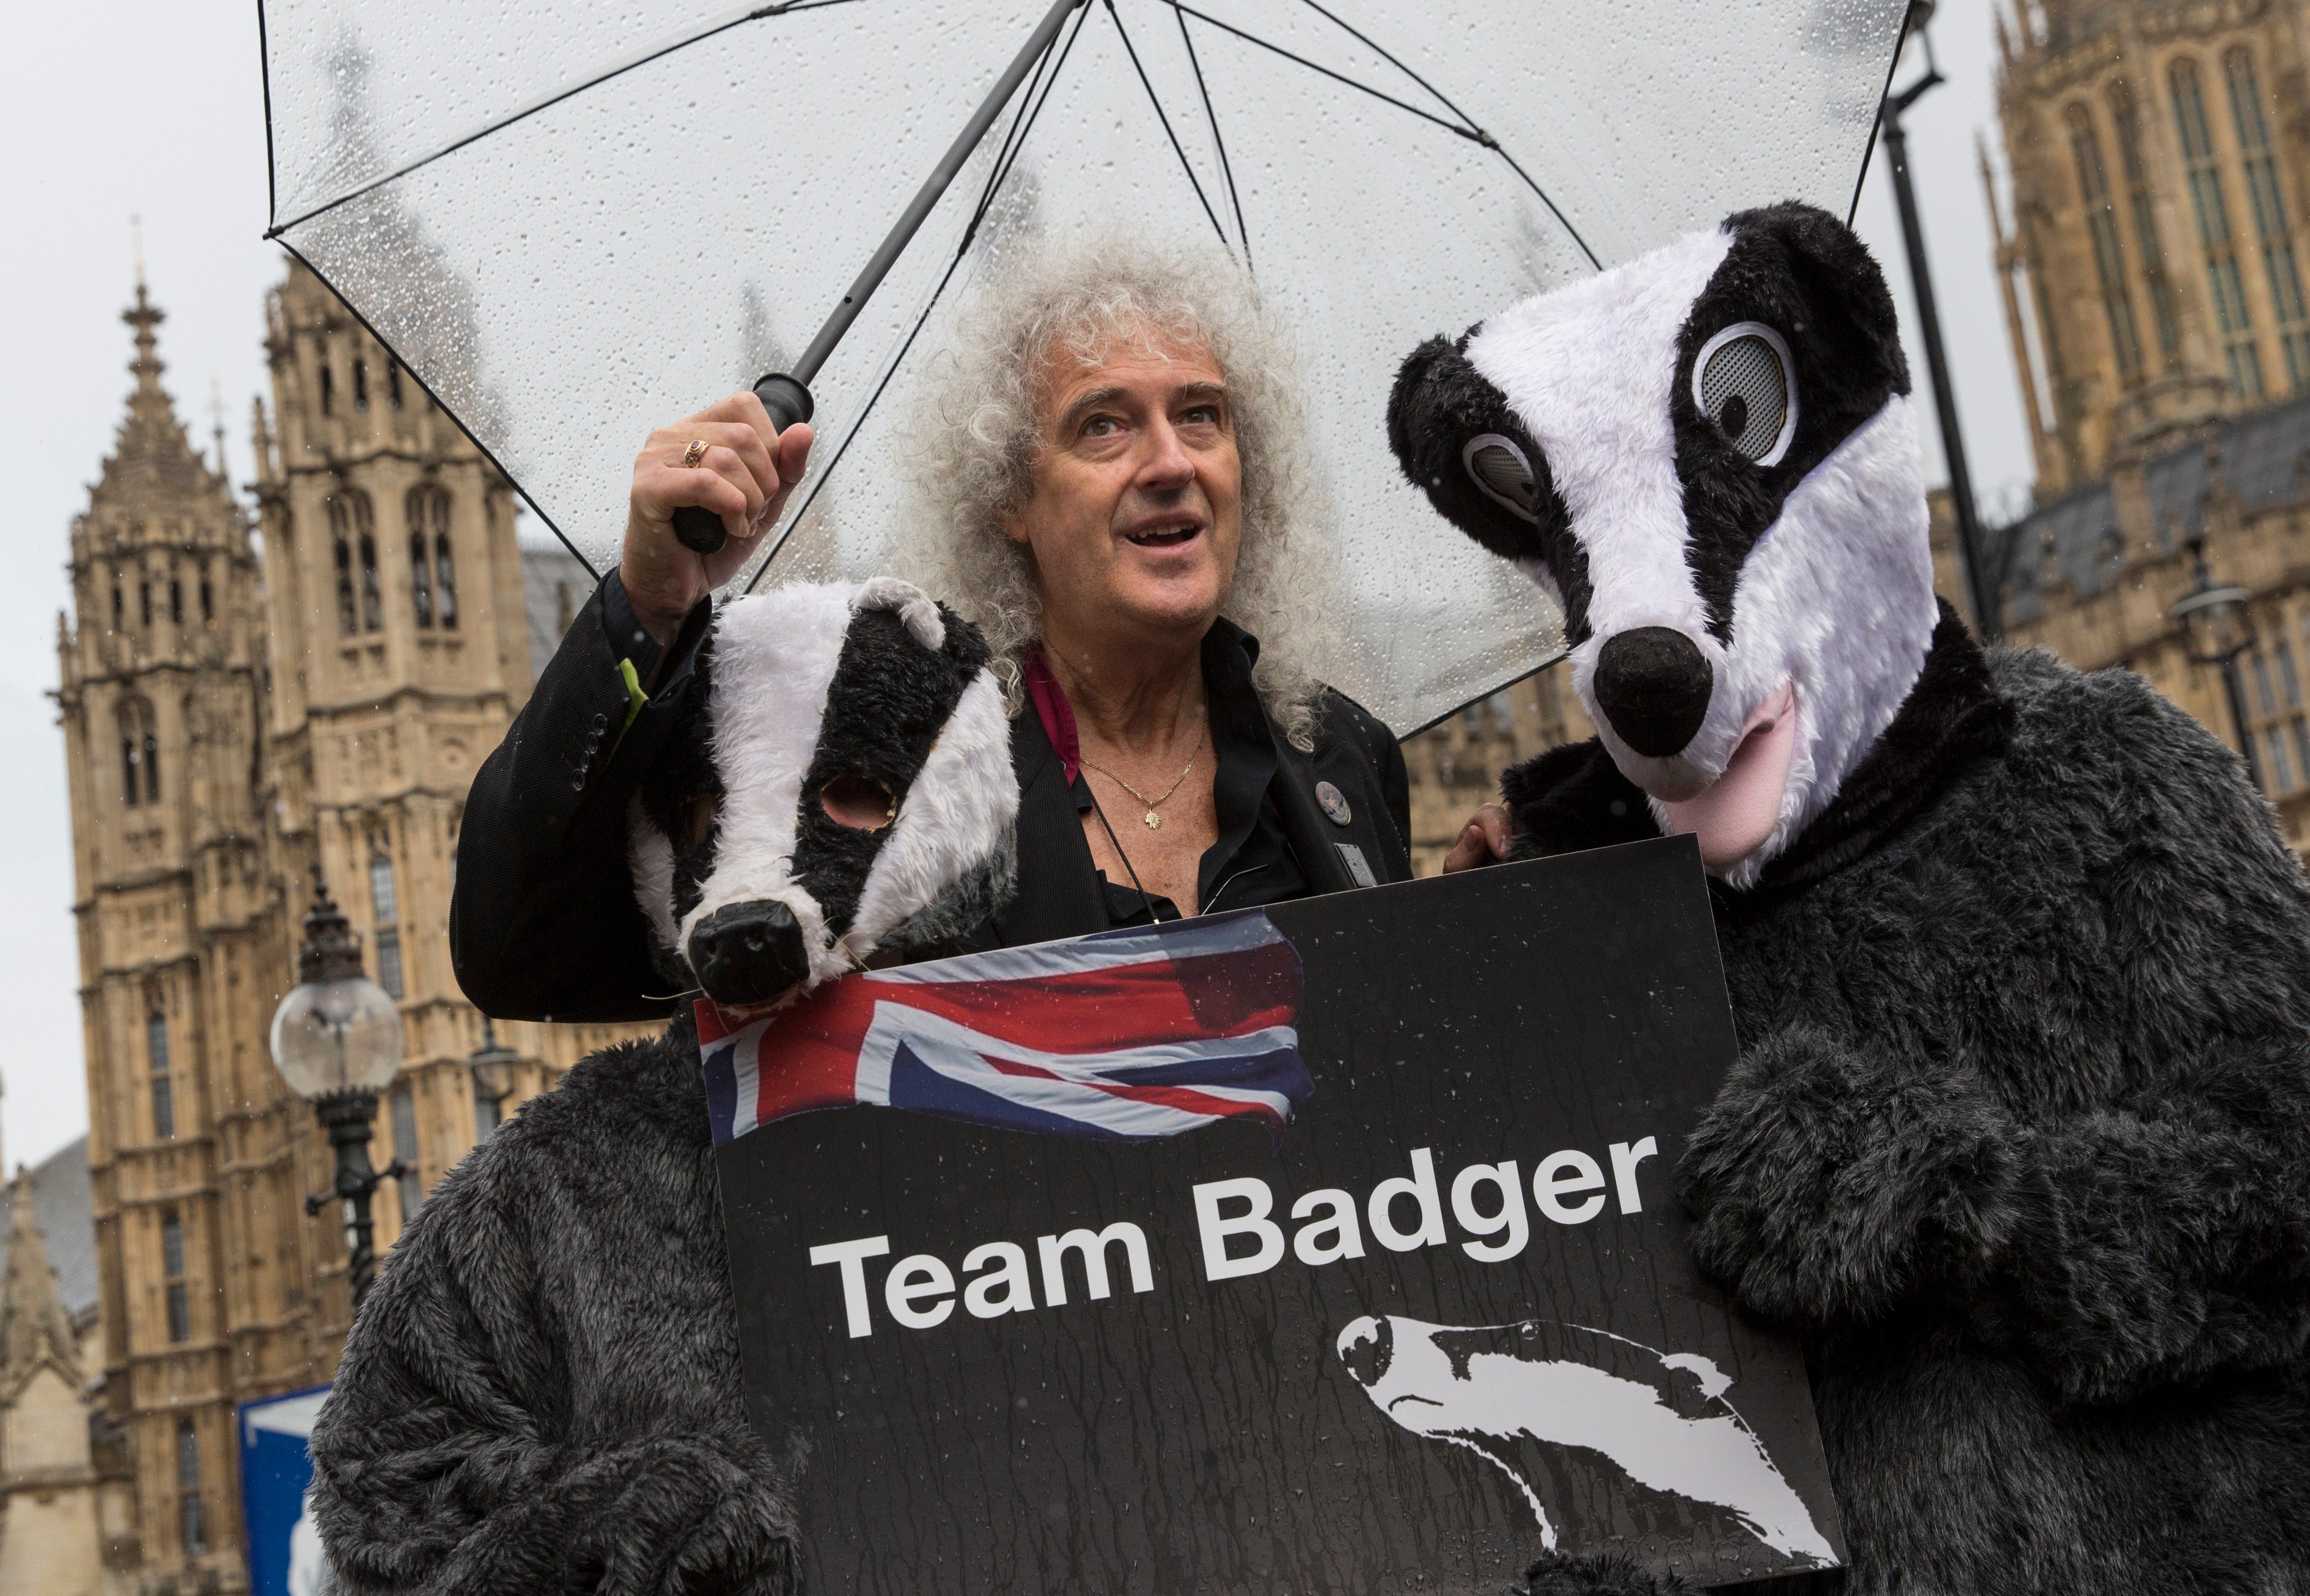 May protesting against badger culling in 2016